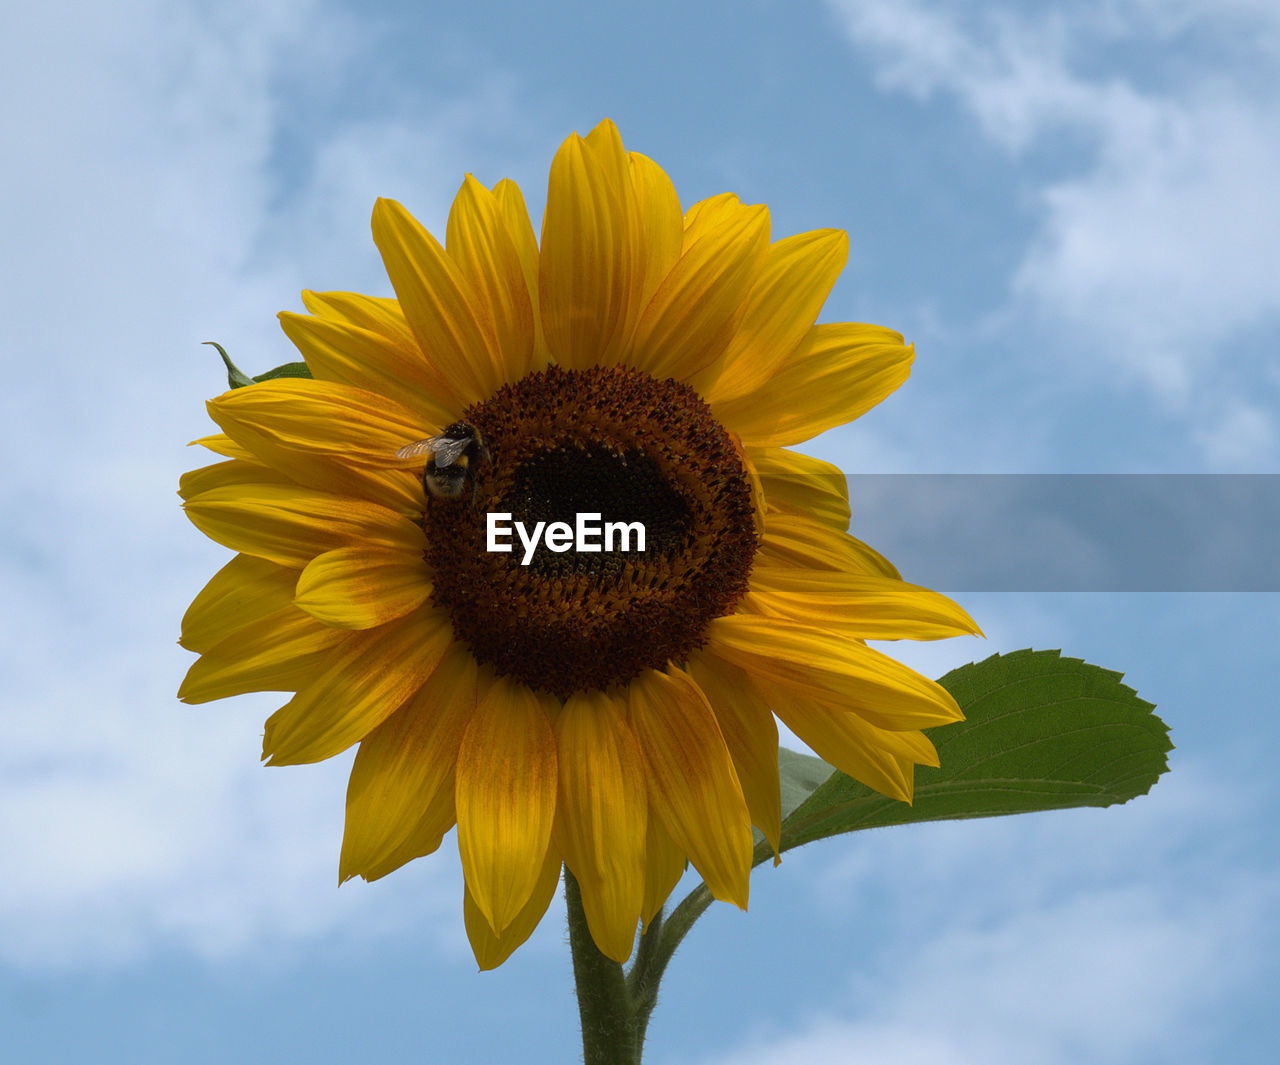 CLOSE-UP OF SUNFLOWER AGAINST SKY